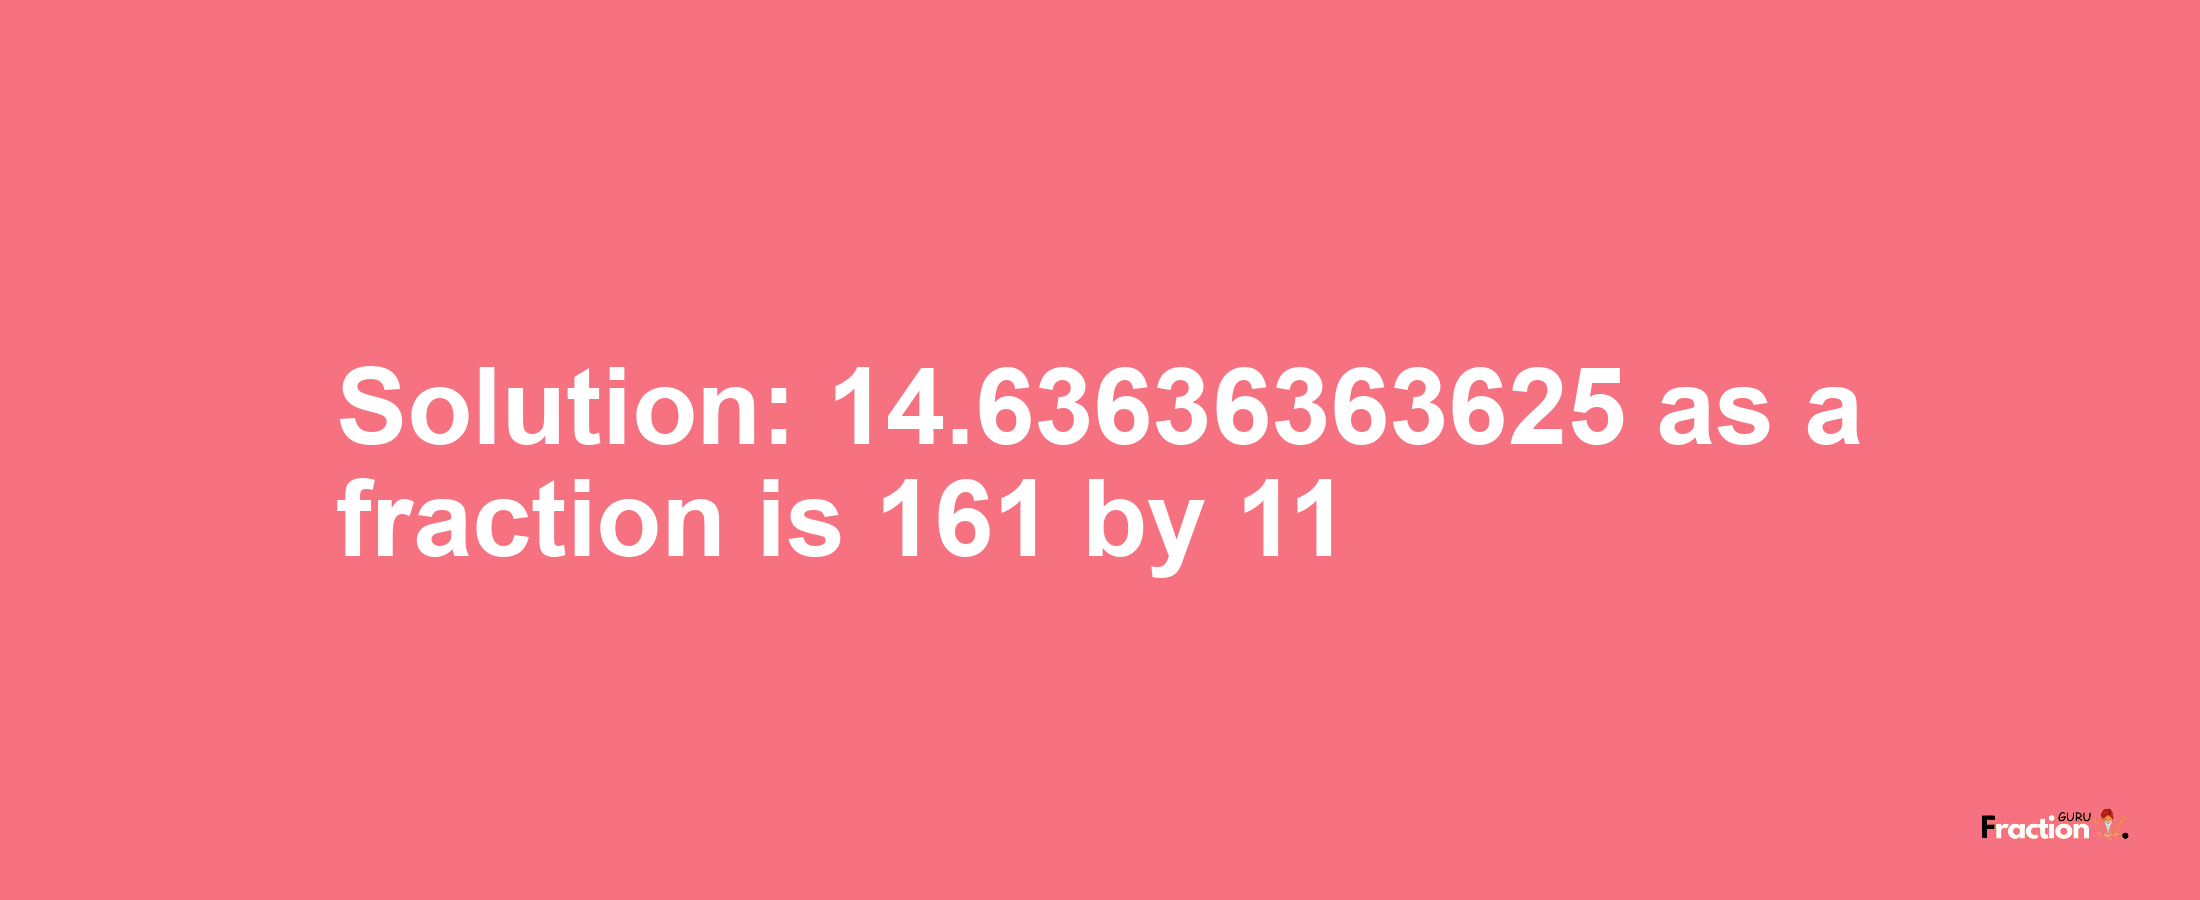 Solution:14.63636363625 as a fraction is 161/11